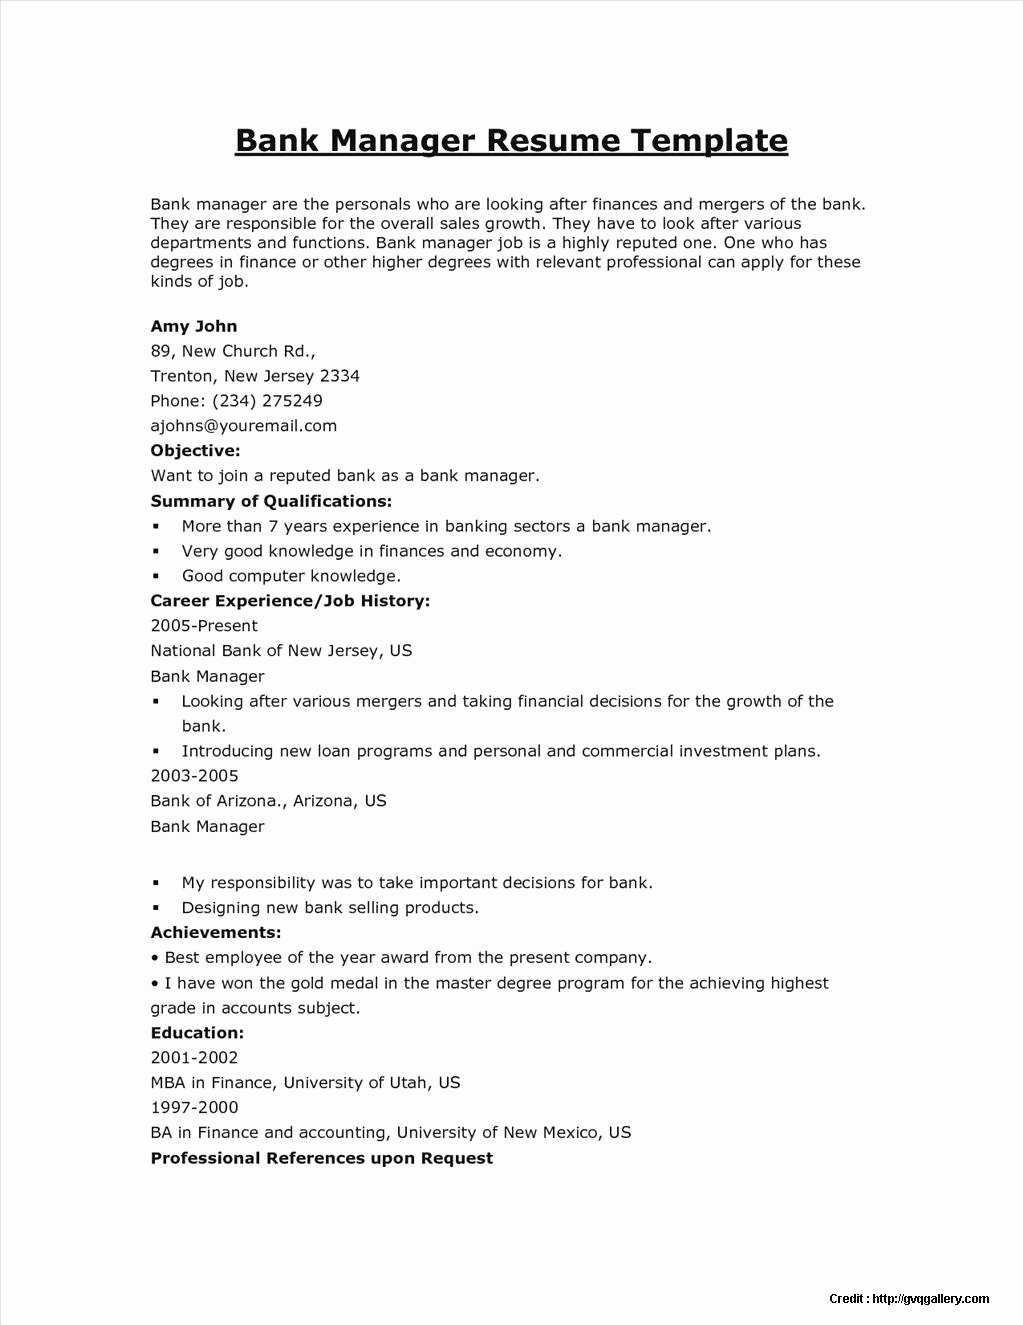 Sample Resume for Bankers Job Resume Resume Examples